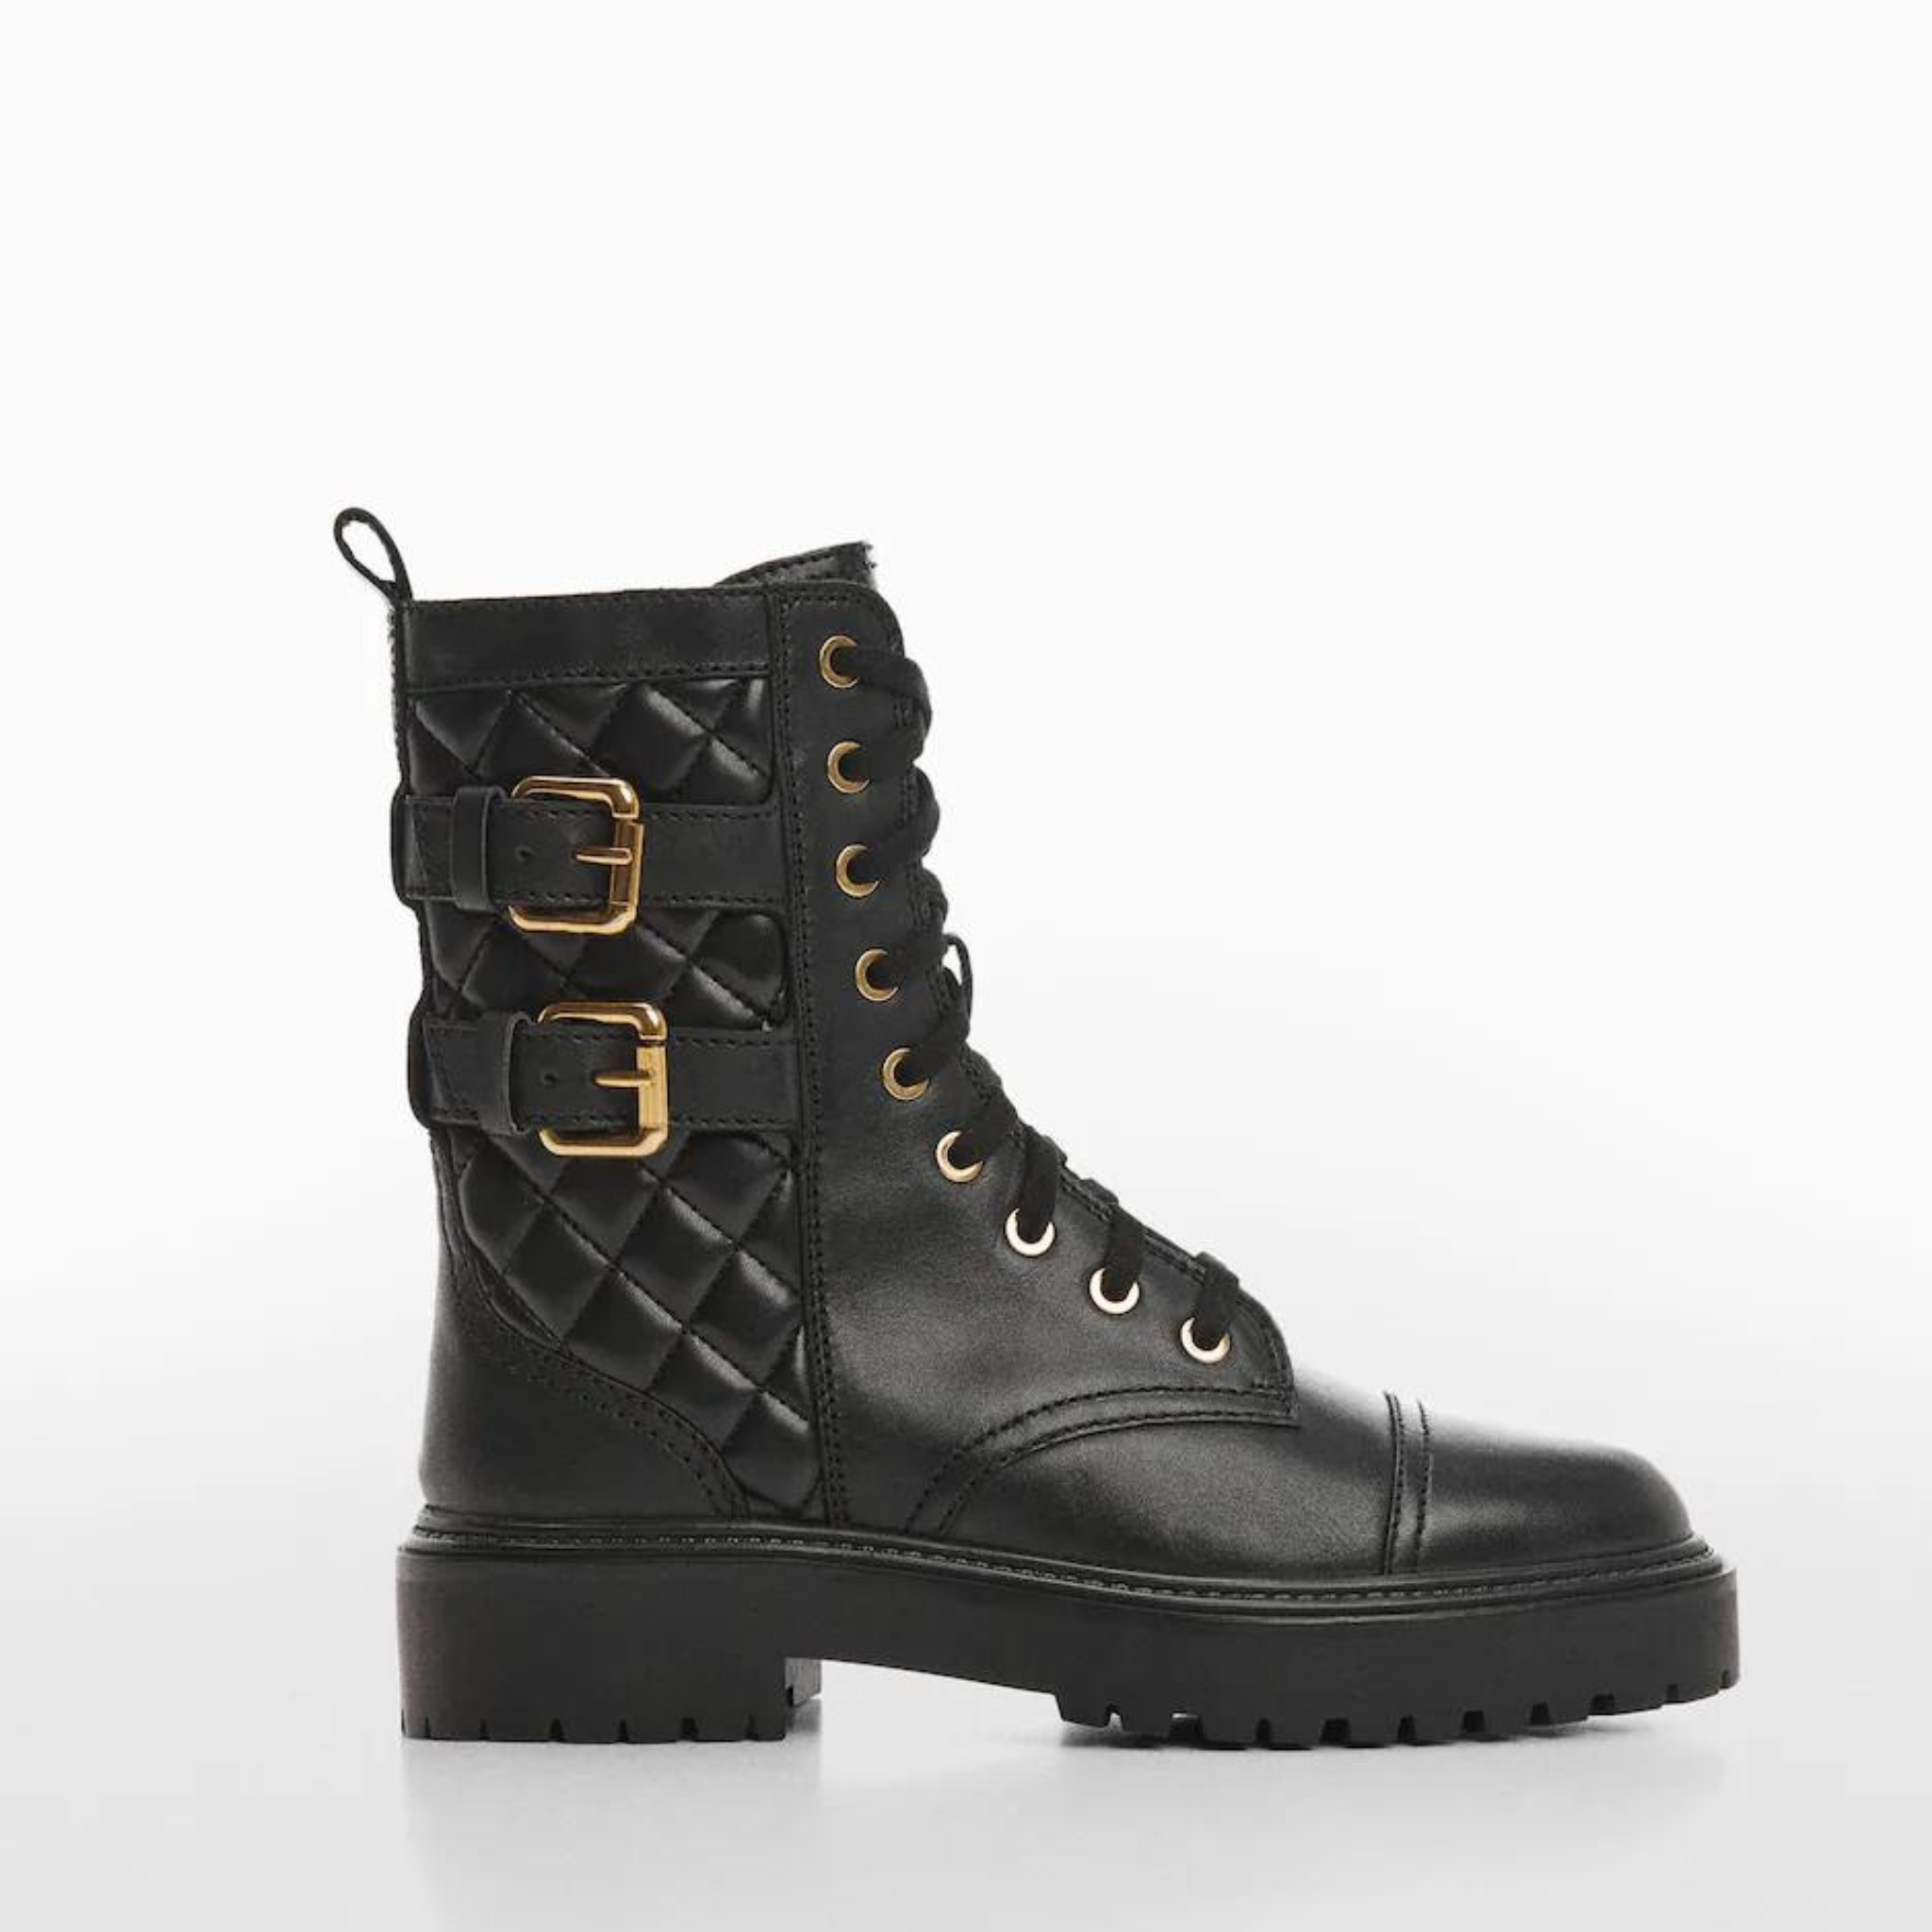 Mango Leather Military Ankle Boots